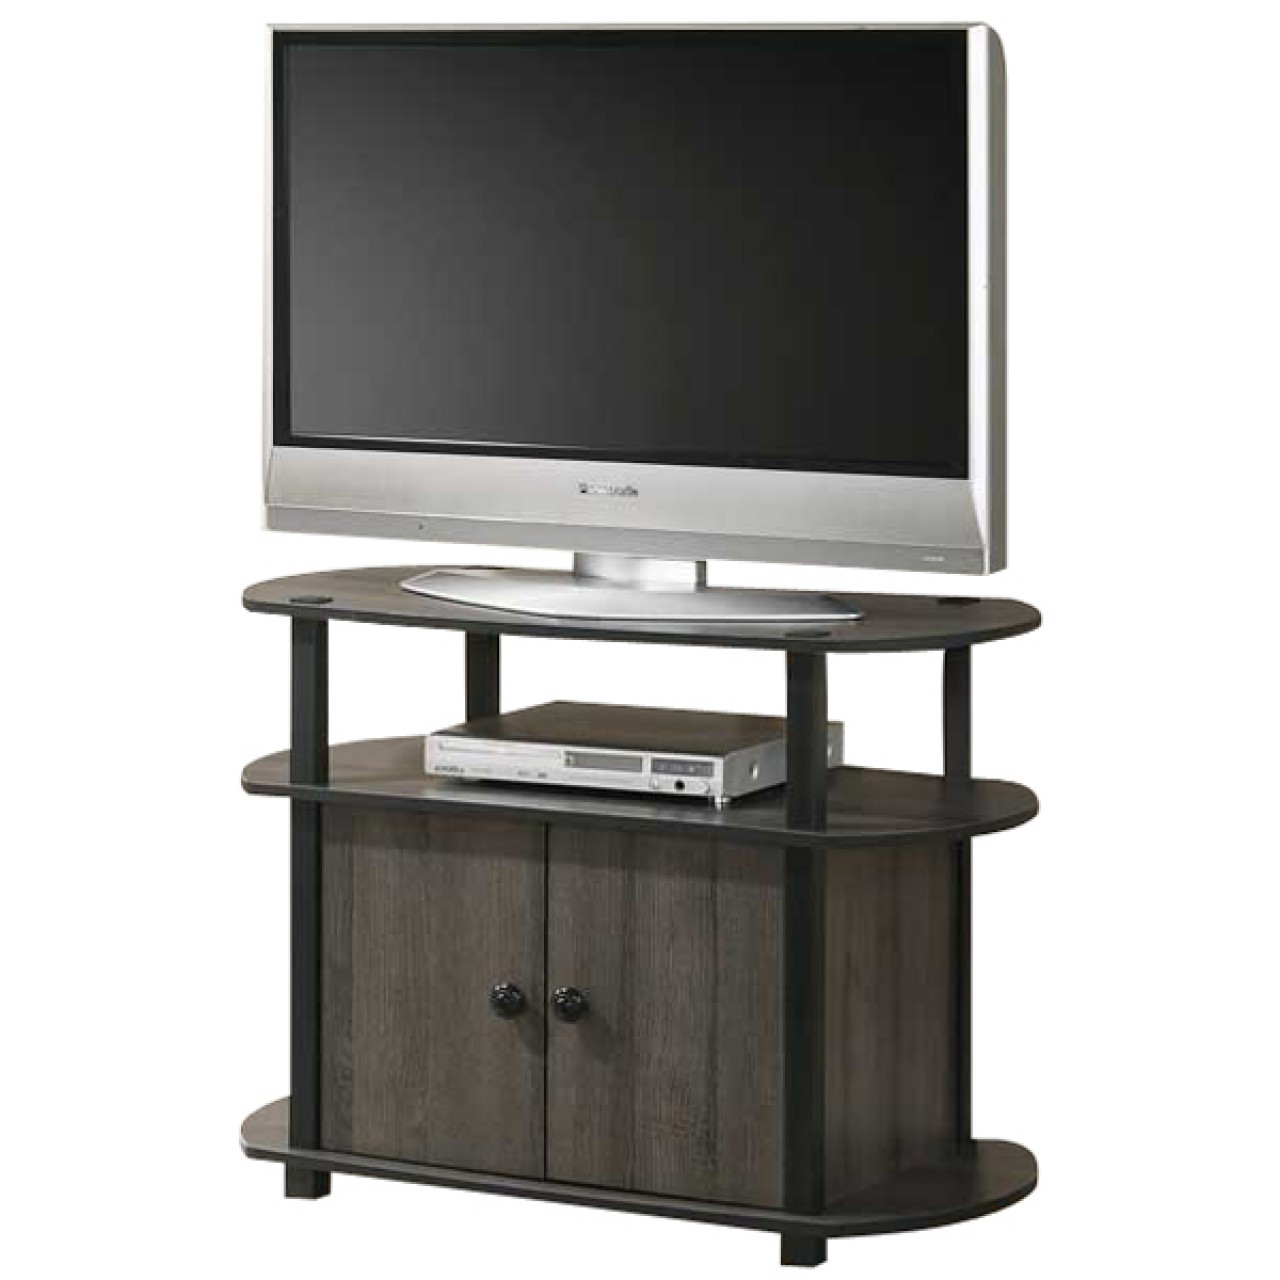 BRIGHTHOME 2 LAYER TV STAND PPS20S  